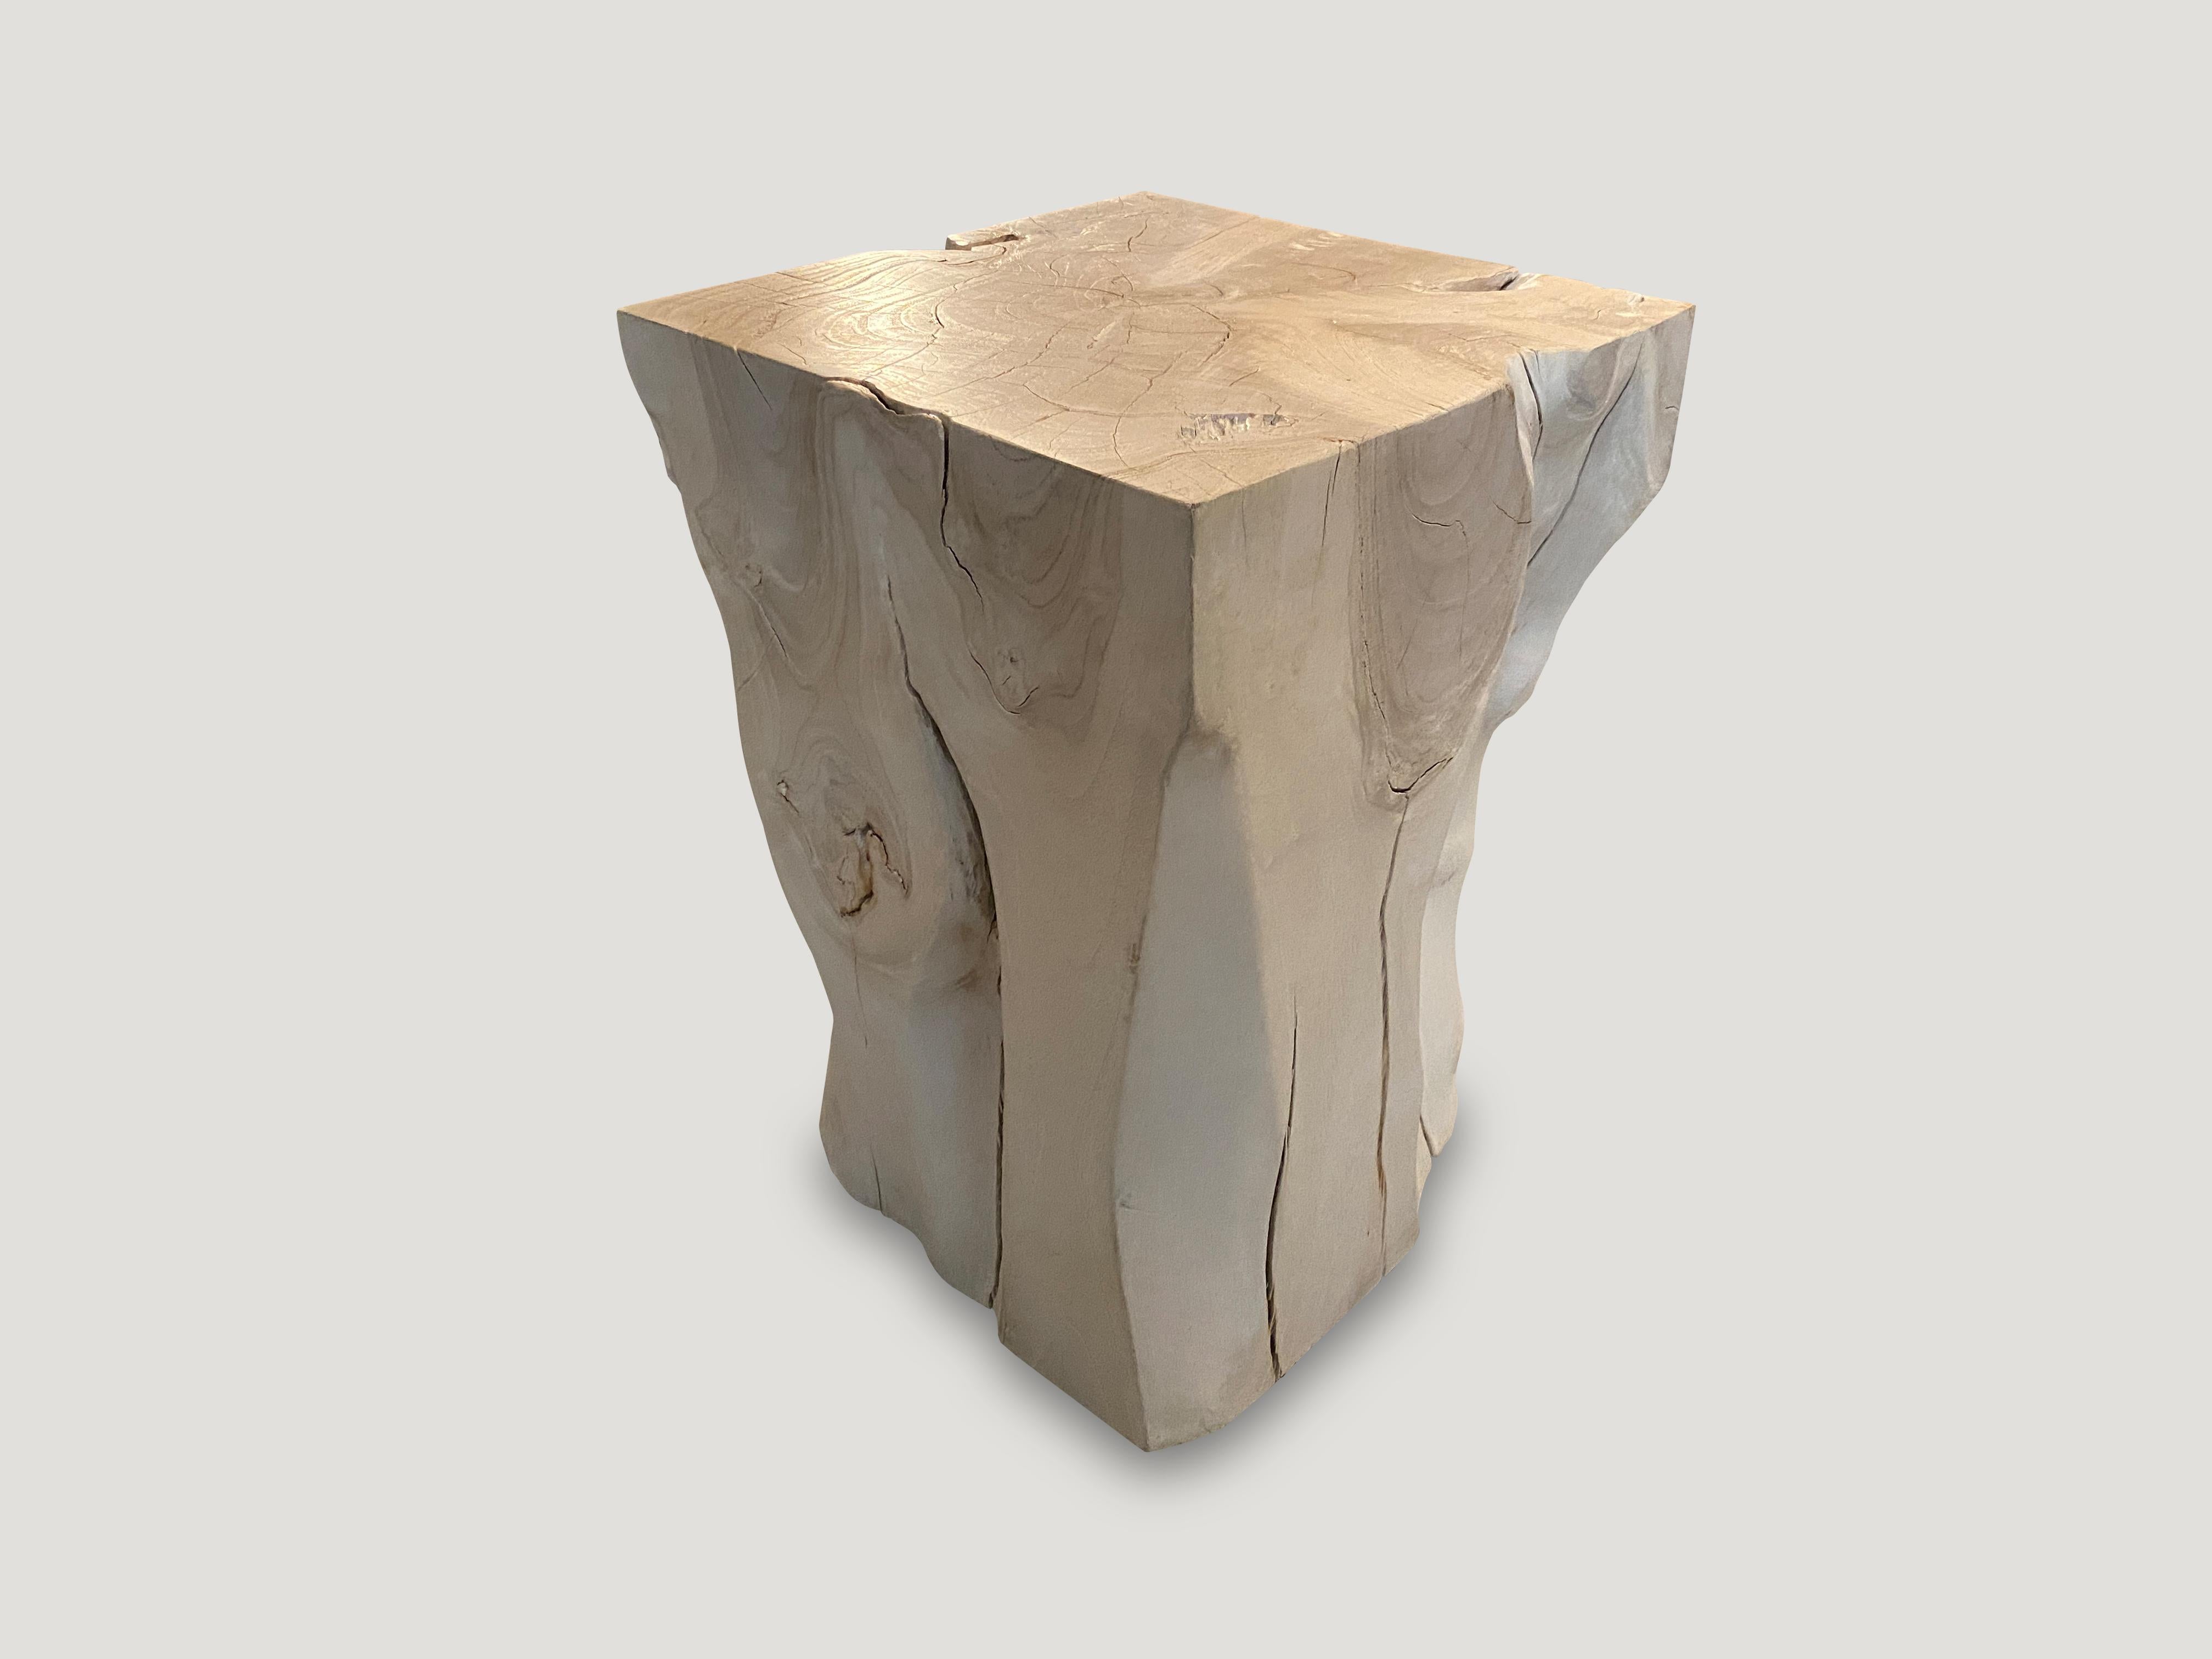 Reclaimed teak wood side table, hand carved whilst respecting the natural organic wood. Bleached to a bone finish. We have a collection. All unique. The price and size reflect the one shown. Also available charred.

The St. Barts collection